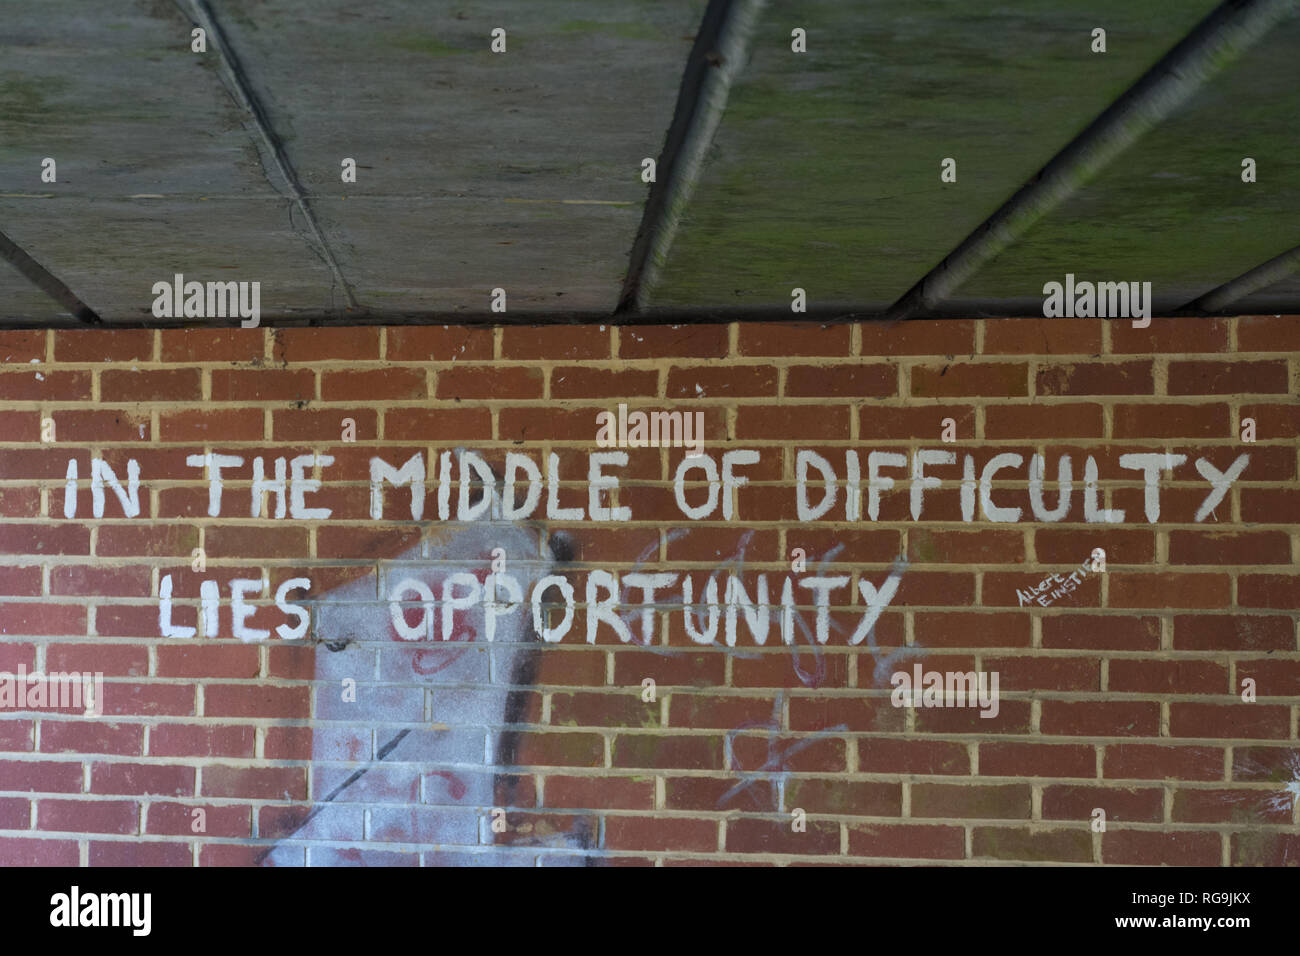 Graffiti under a bridge - In the middle of difficulty lies opportunity - a quote (quotation) from Albert Einstein. Inspirational thought or idea. Stock Photo